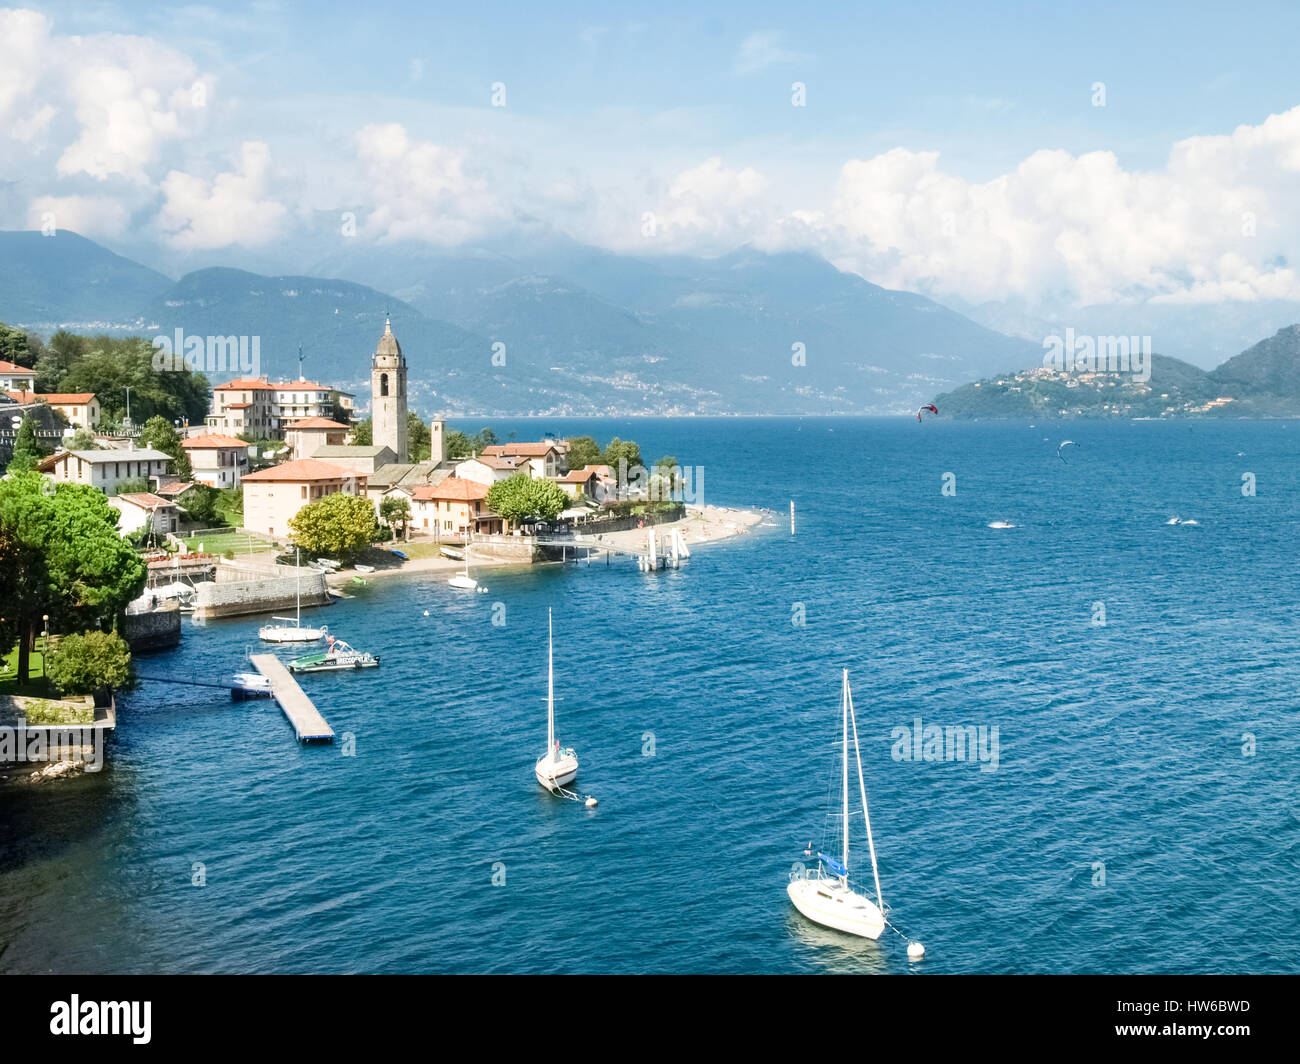 Cremia, Italy - August 25, 2015: Panorama of the village of Cremia directly overlooking Lake Como. Stock Photo